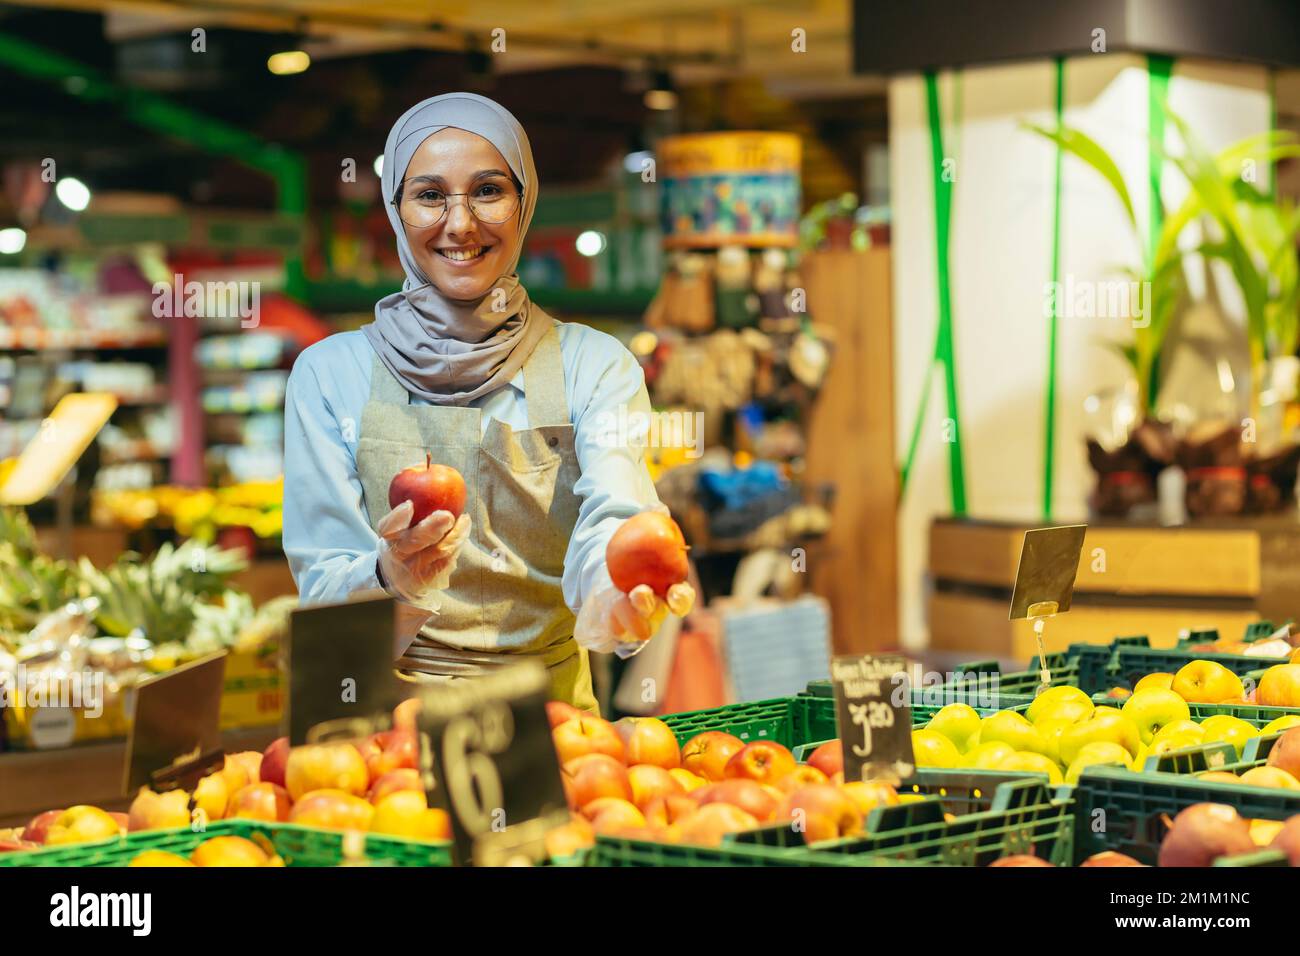 Portrait of saleswoman in supermarket, happy woman in hijab smiling and looking at camera, seller holding apples in vegetable section, Muslim woman in glasses and apron among shelves with goods. Stock Photo